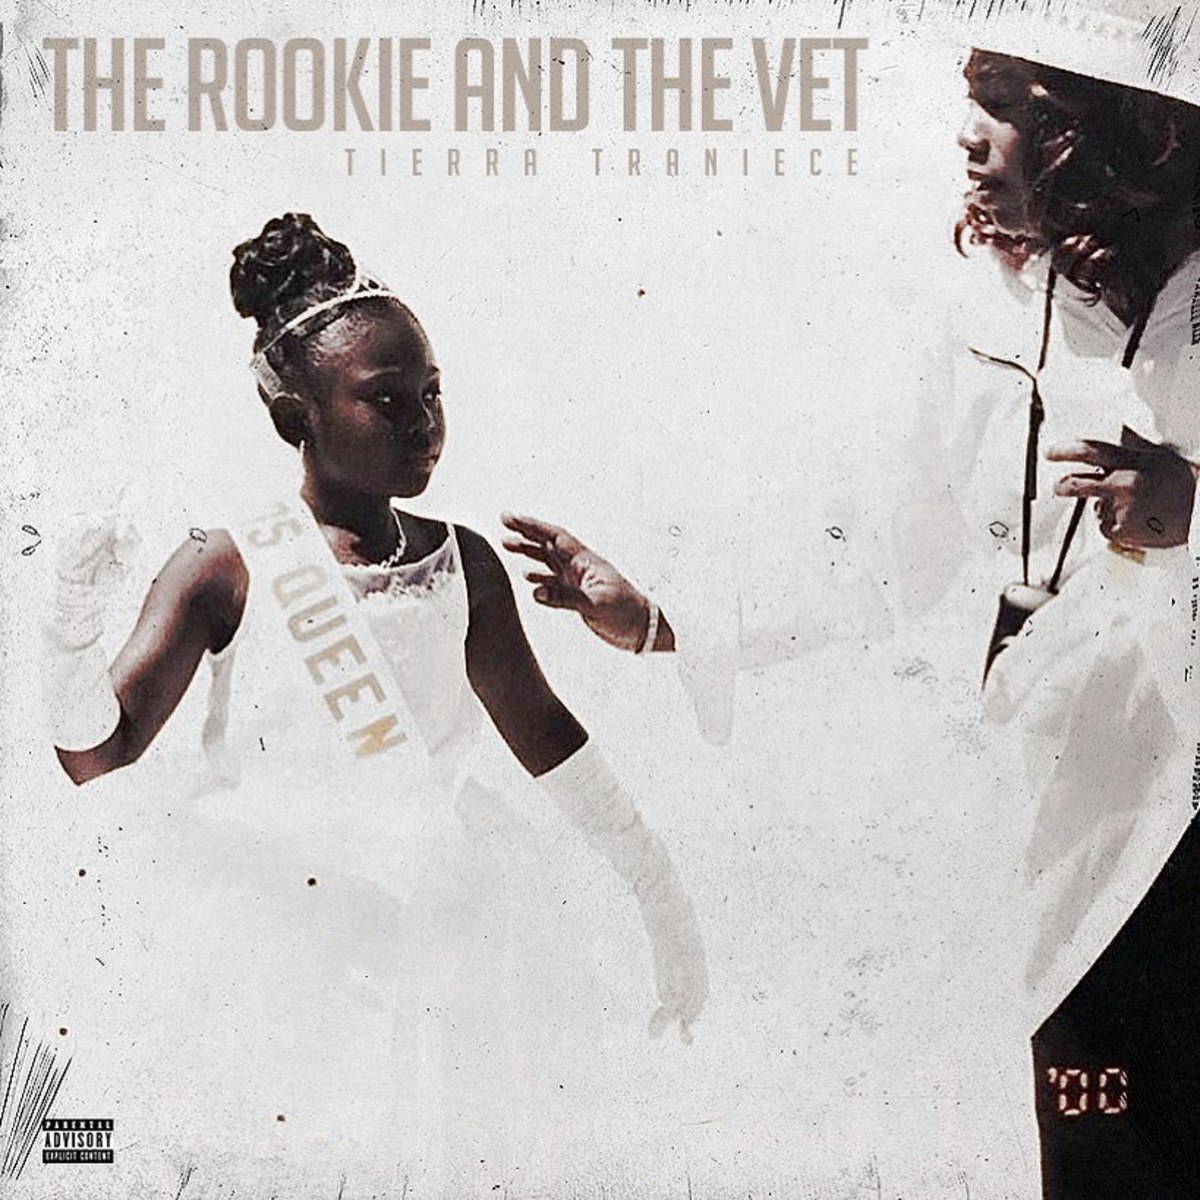 tierra-traniece-the-rookie-and-the-vet-cover